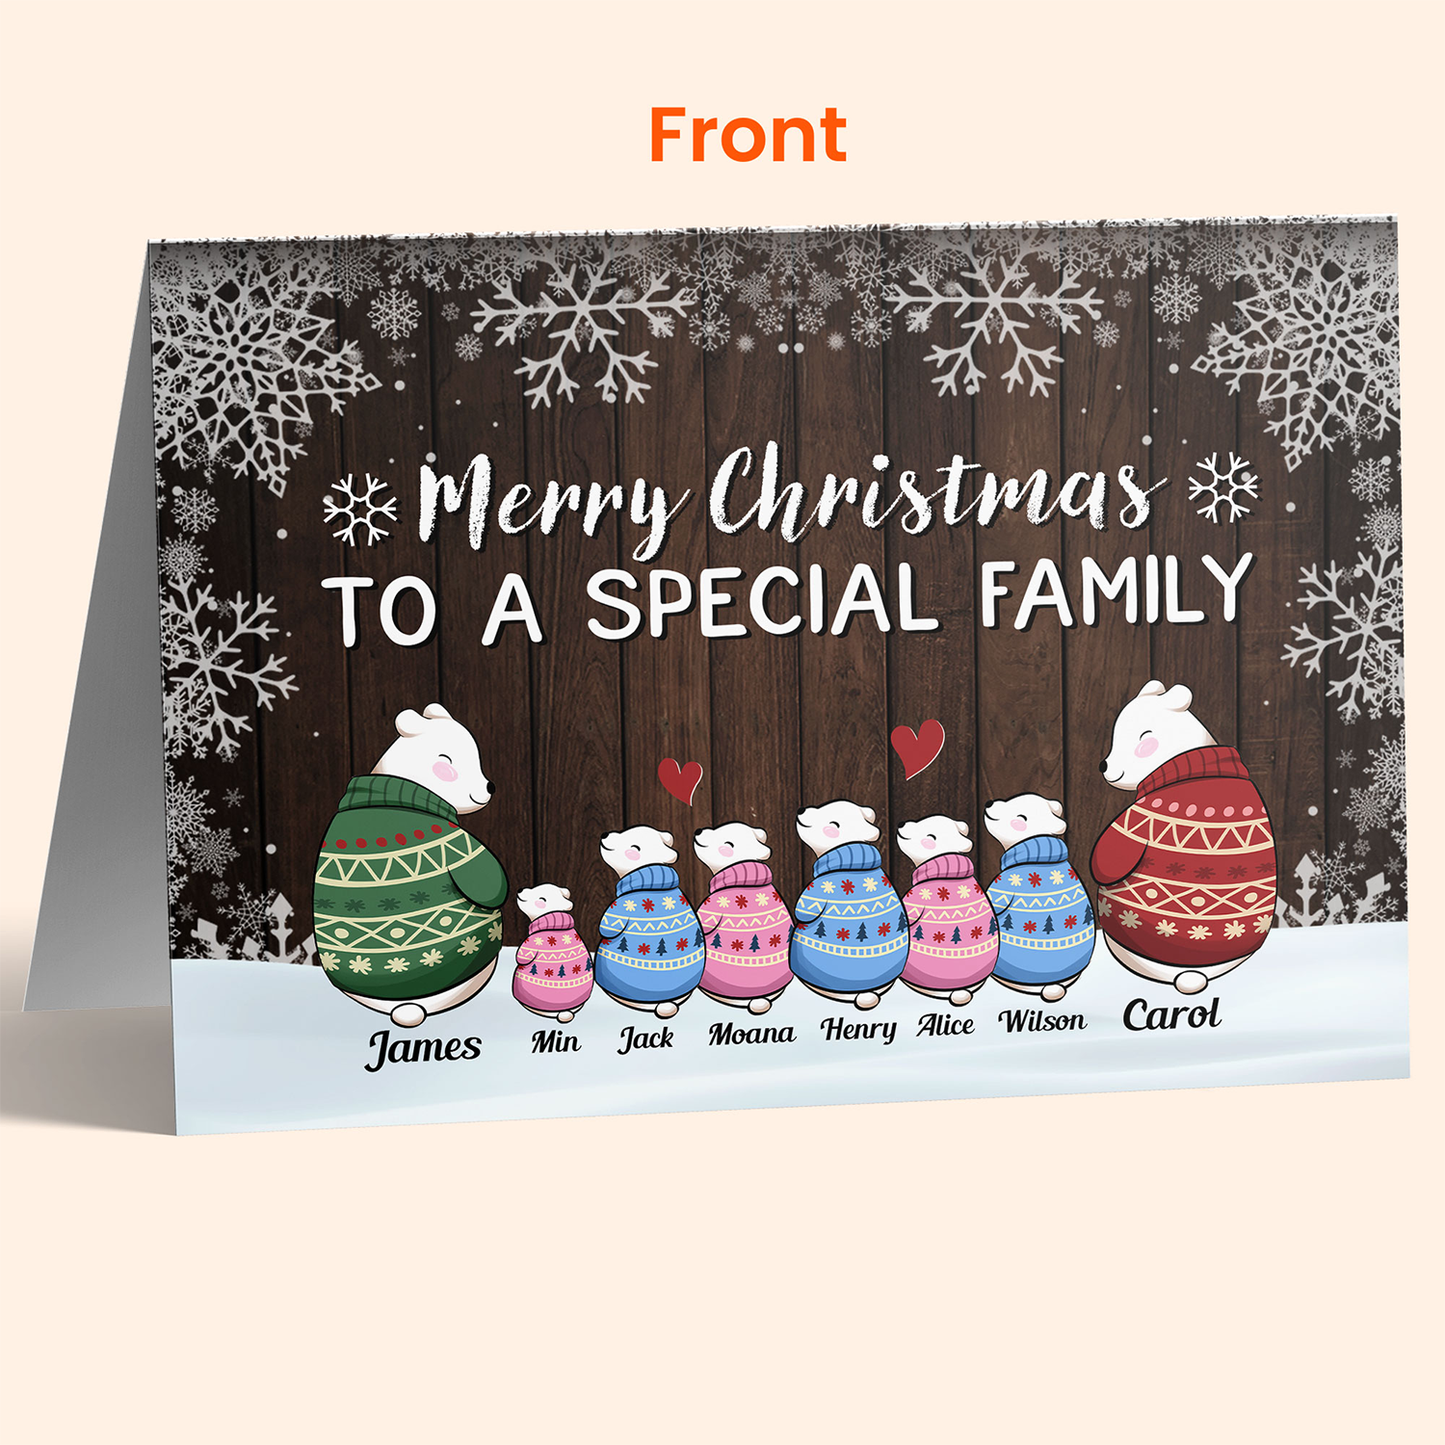 Merry Christmas To A Special Family - Personalized Folded Card - Christmas Gift For Family Members